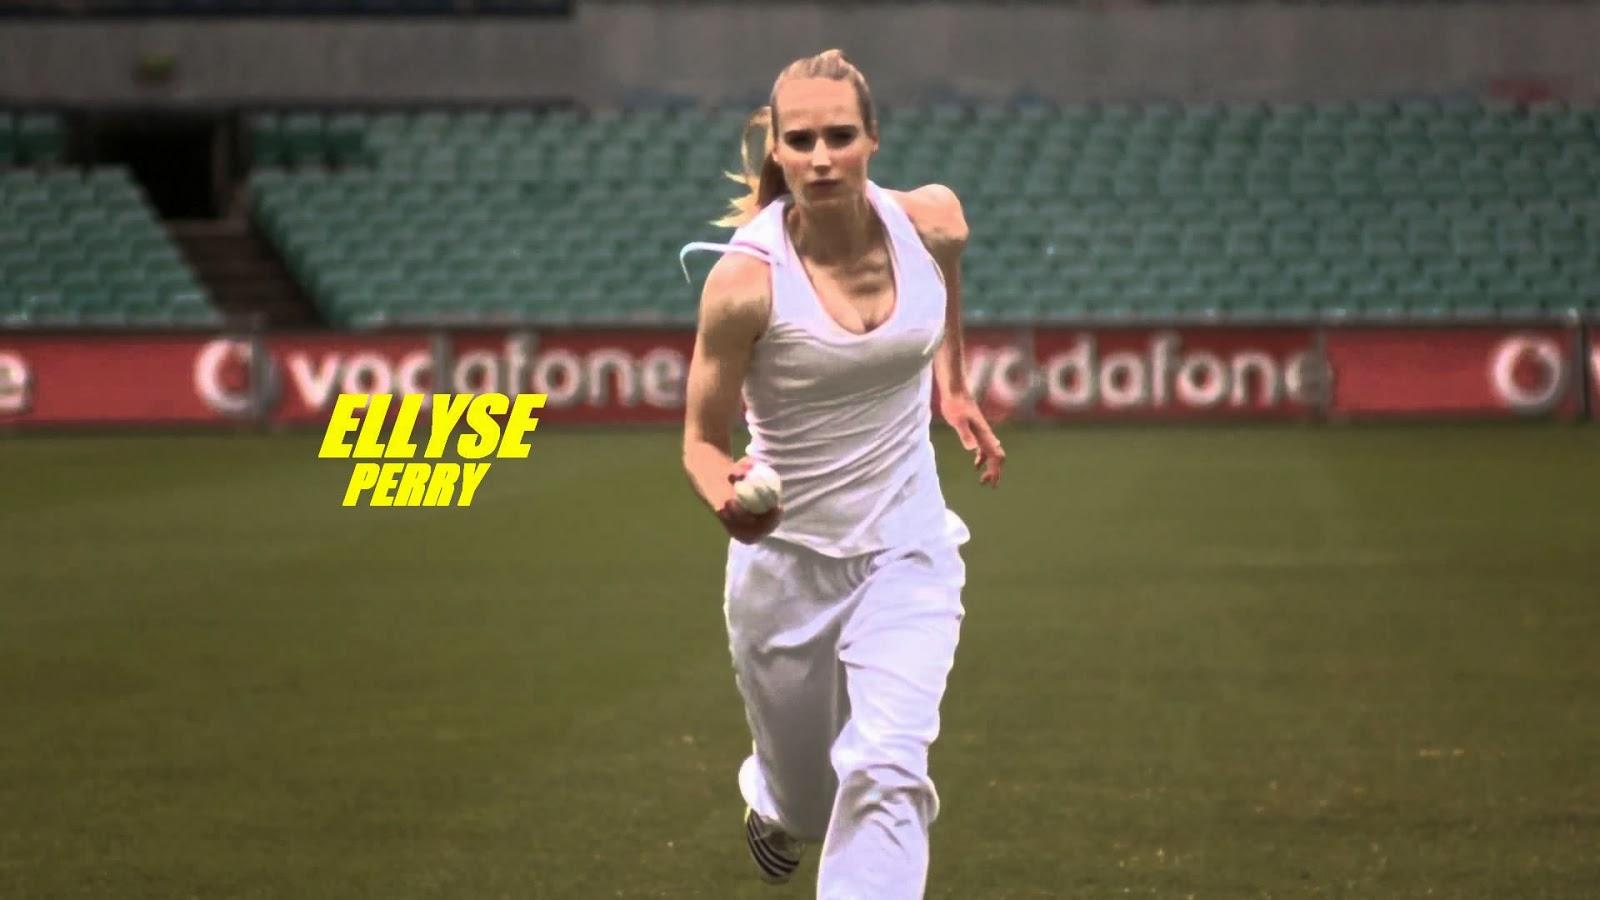 All Blu Ray Wallpaper: Ellyse Perry Profile And Latest Wallpaper 2014